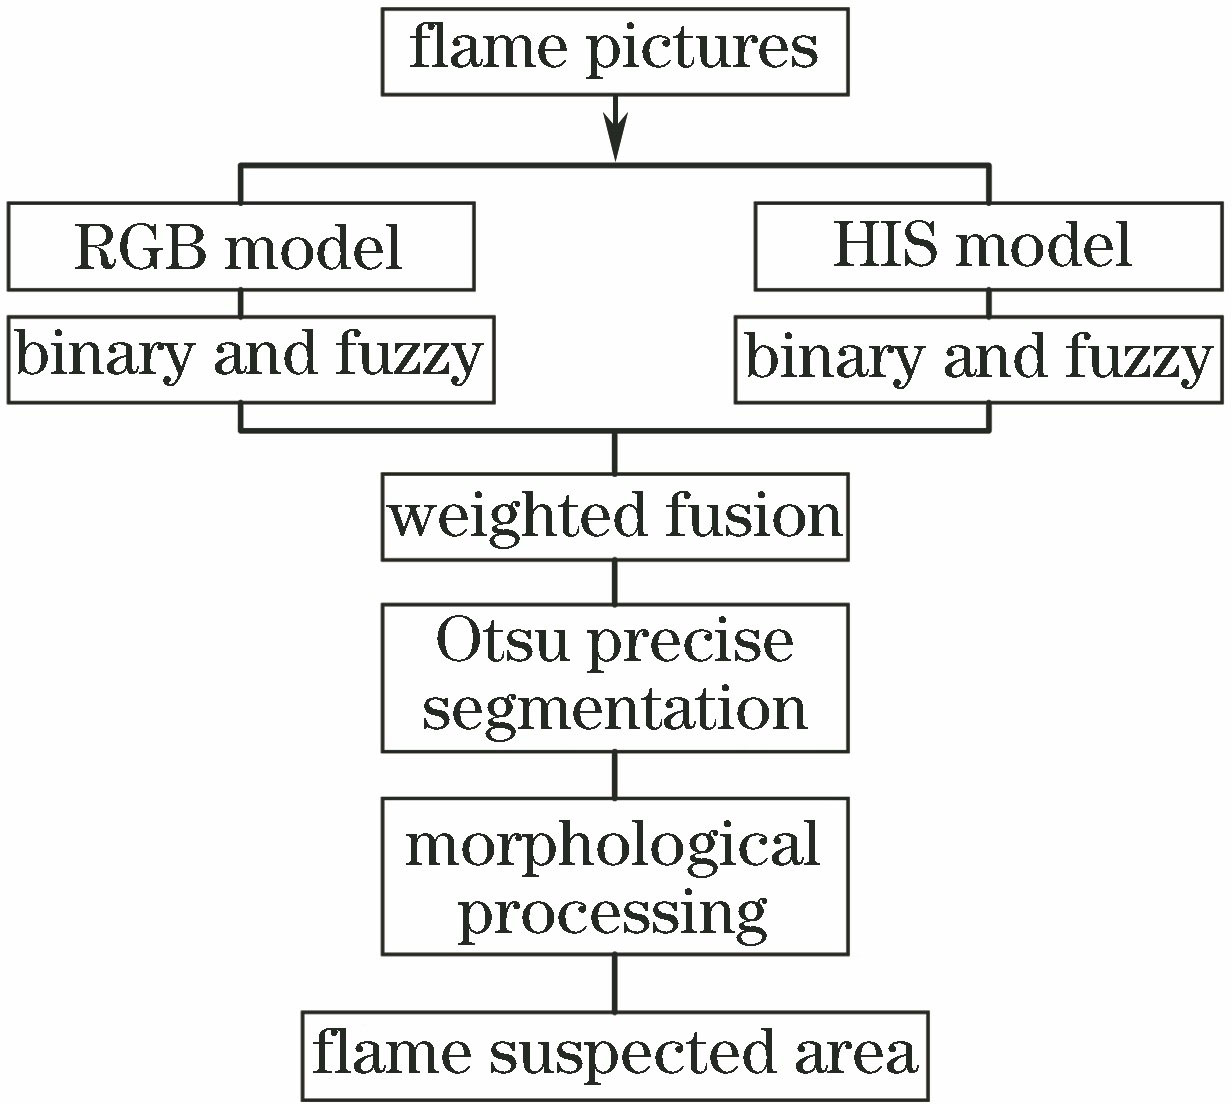 Flow chart of flame foreground extraction